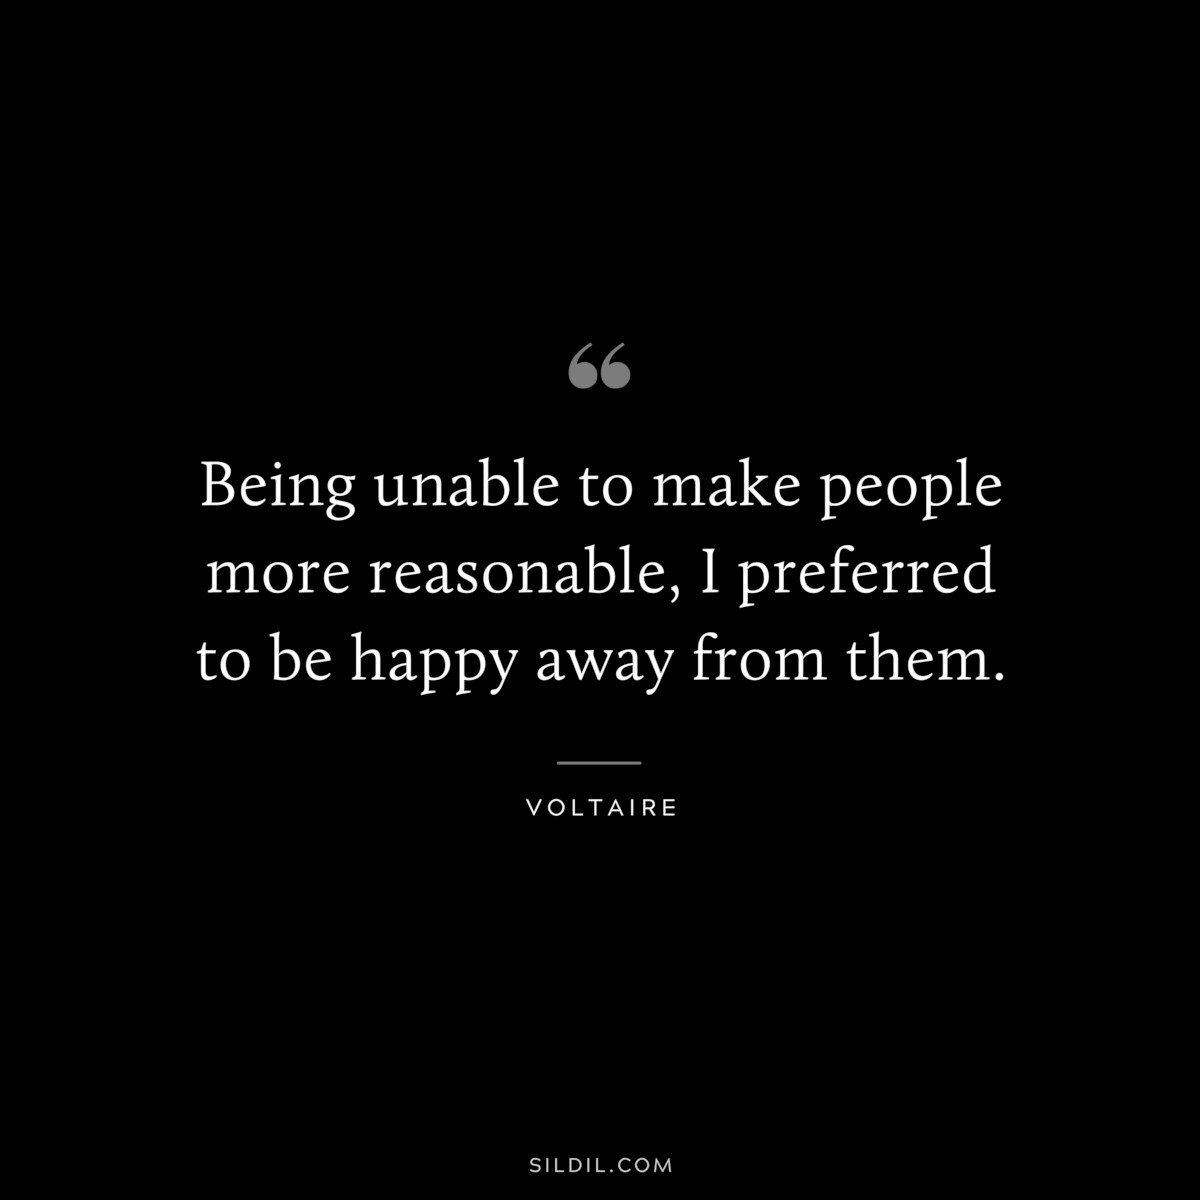 Being unable to make people more reasonable, I preferred to be happy away from them. ― Voltaire